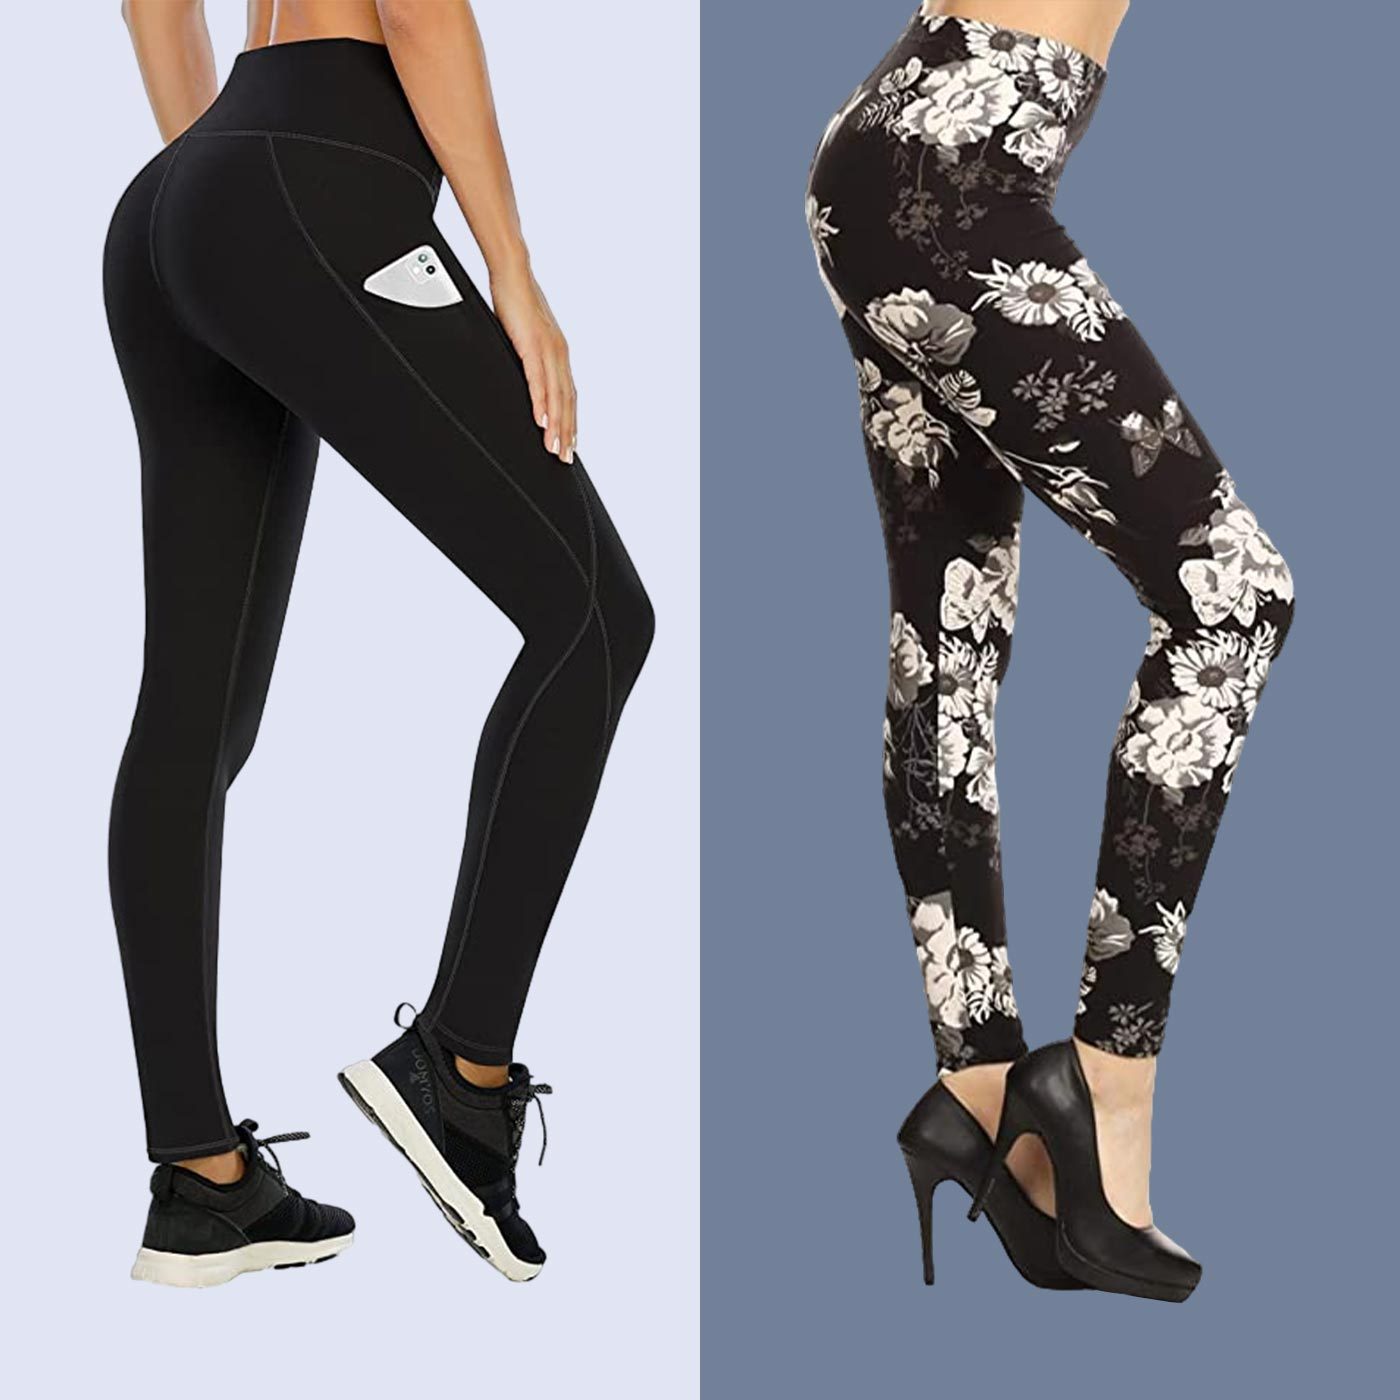 The best leggings for lounging, according to six shopping editors